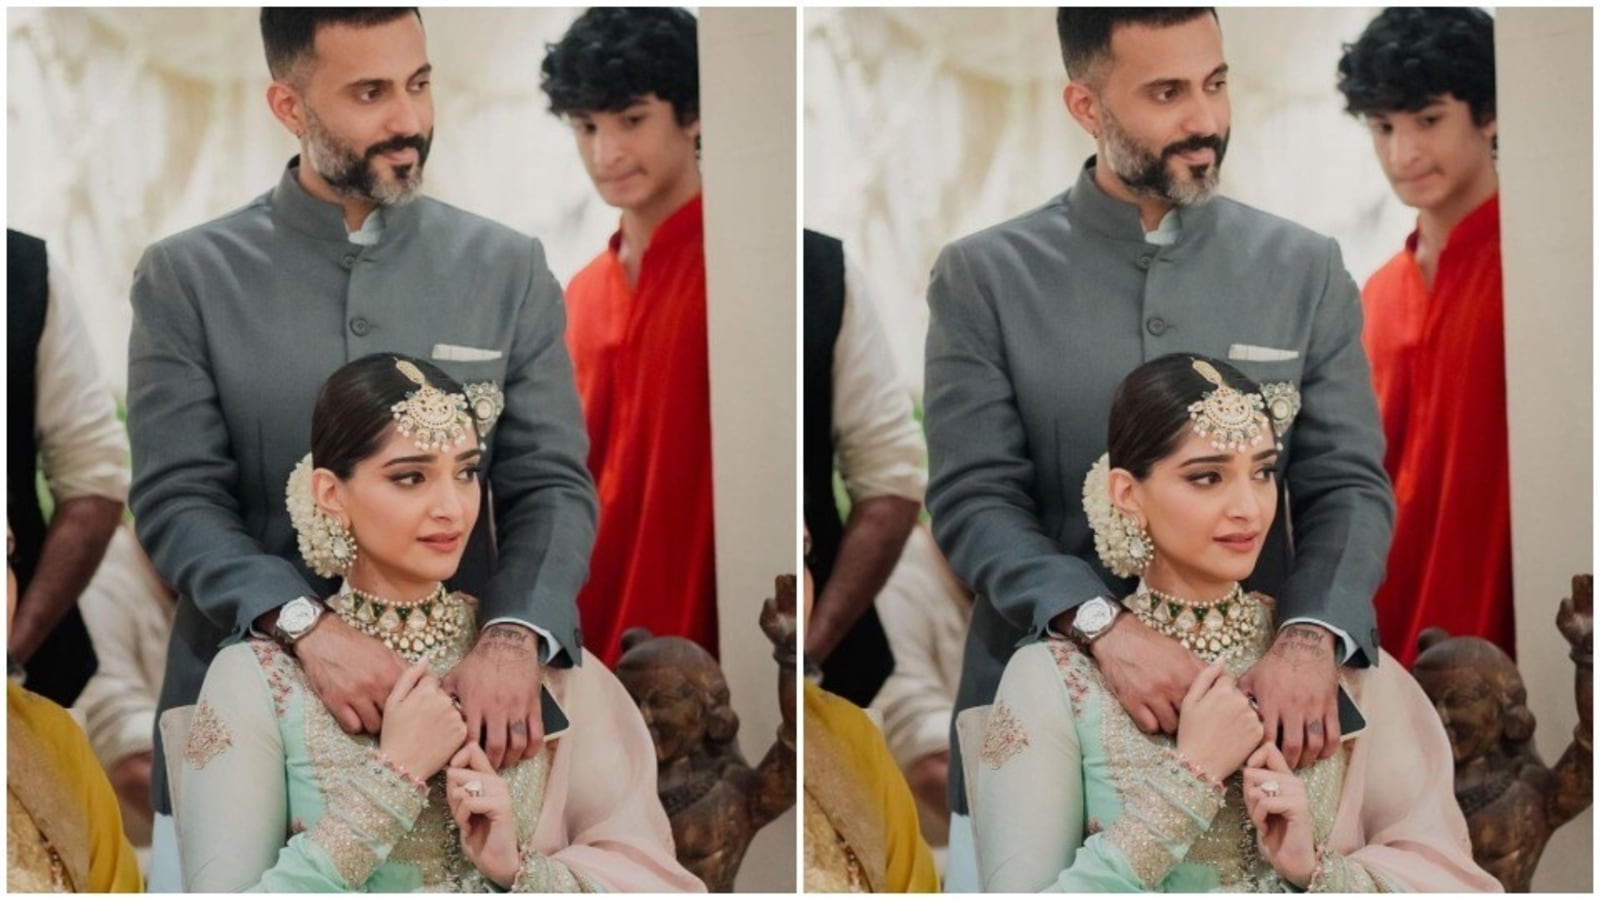 Emotional Sonam Kapoor holds Anand Ahuja's hand for comfort at Rhea Kapoor's  wedding. See pic | Bollywood - Hindustan Times